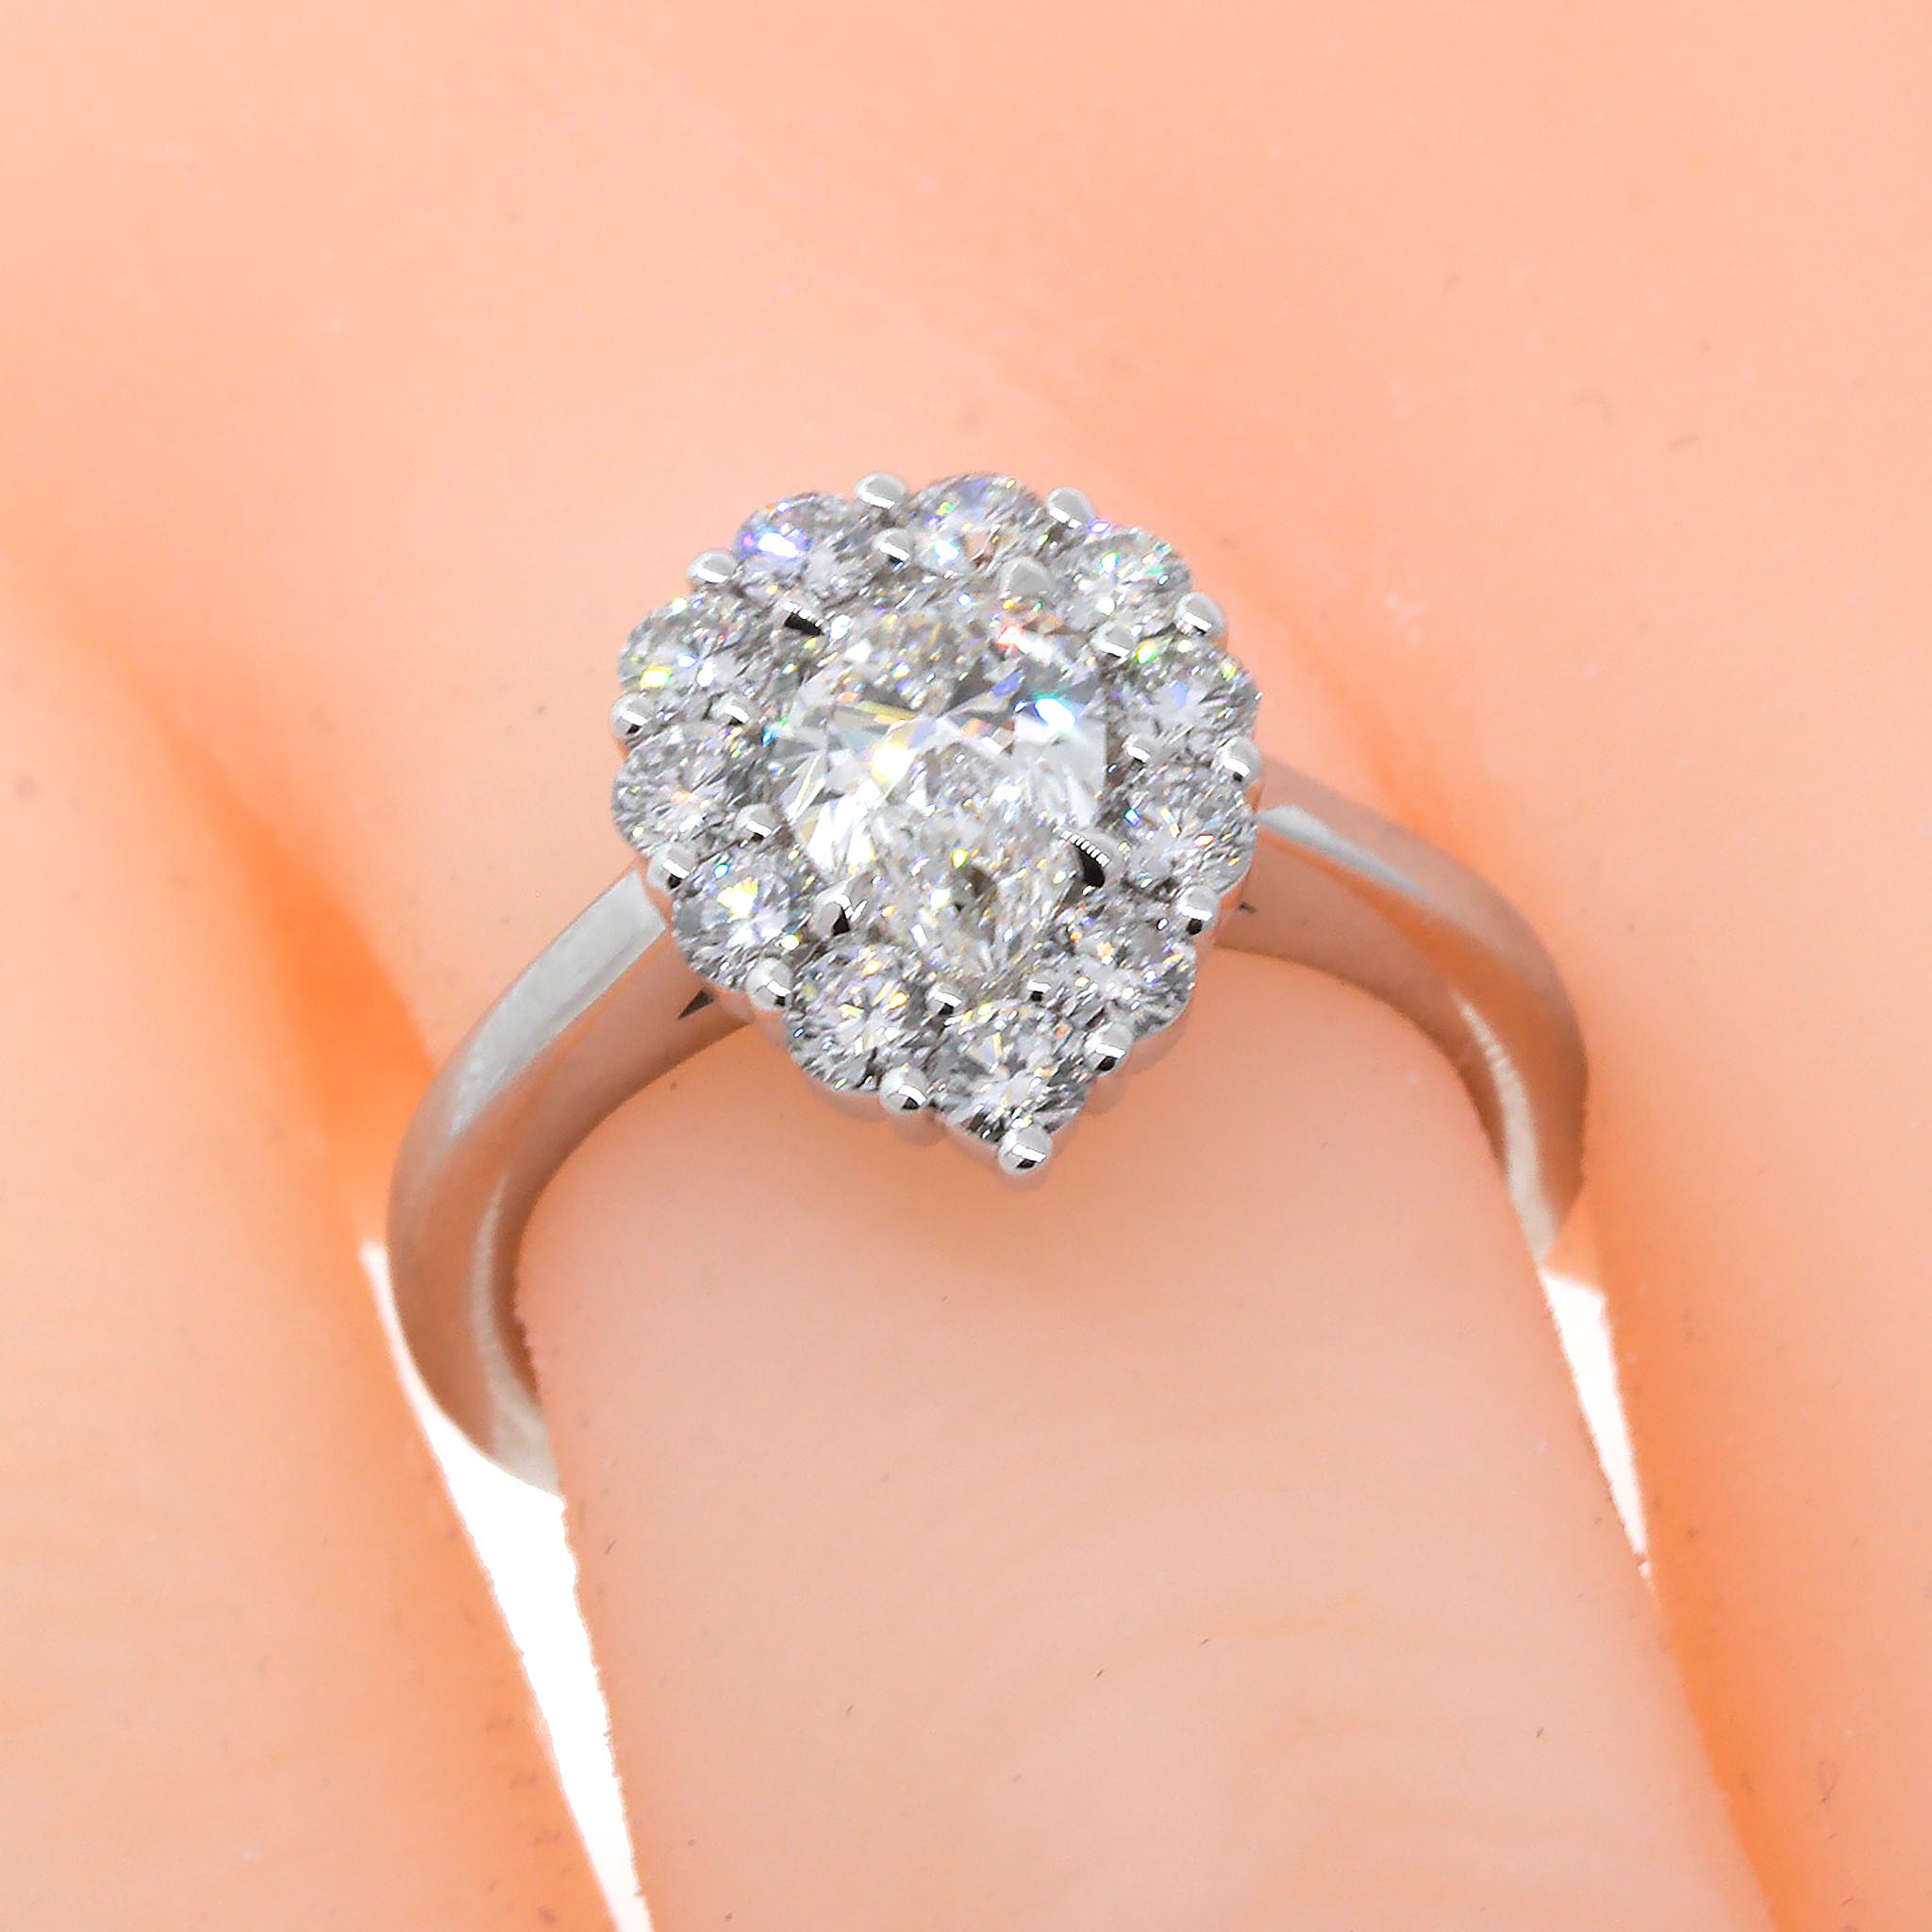 14 kt White Gold
GIA Report Number 6322522341
Pear Shaped Cut = 0.90 ct twd
Color: G
Clarity SI1
Ring Size: 5.5 (resizeable)